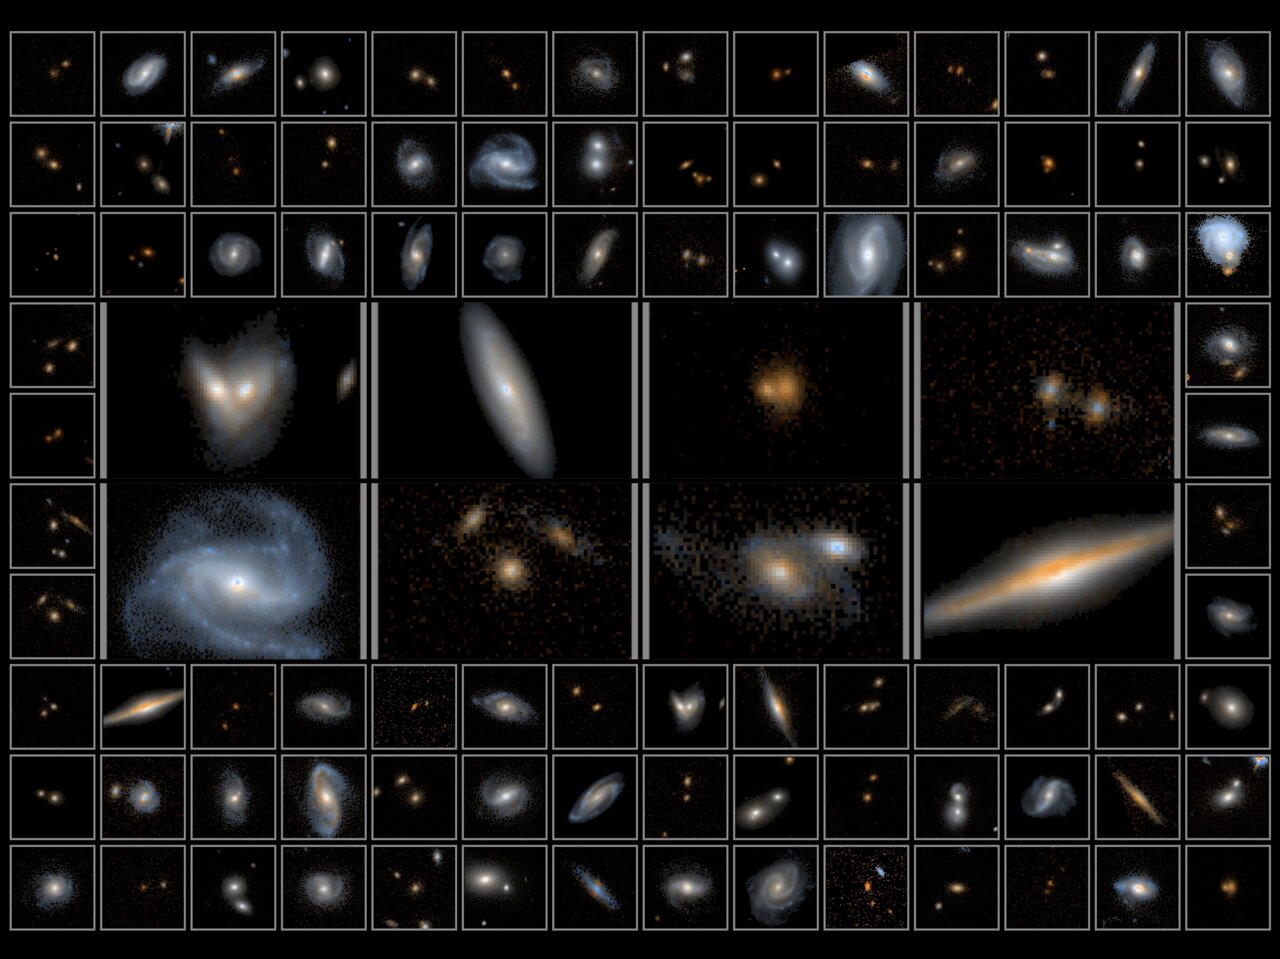 Hubble captures largest near-infrared image to find universes rarest galaxies